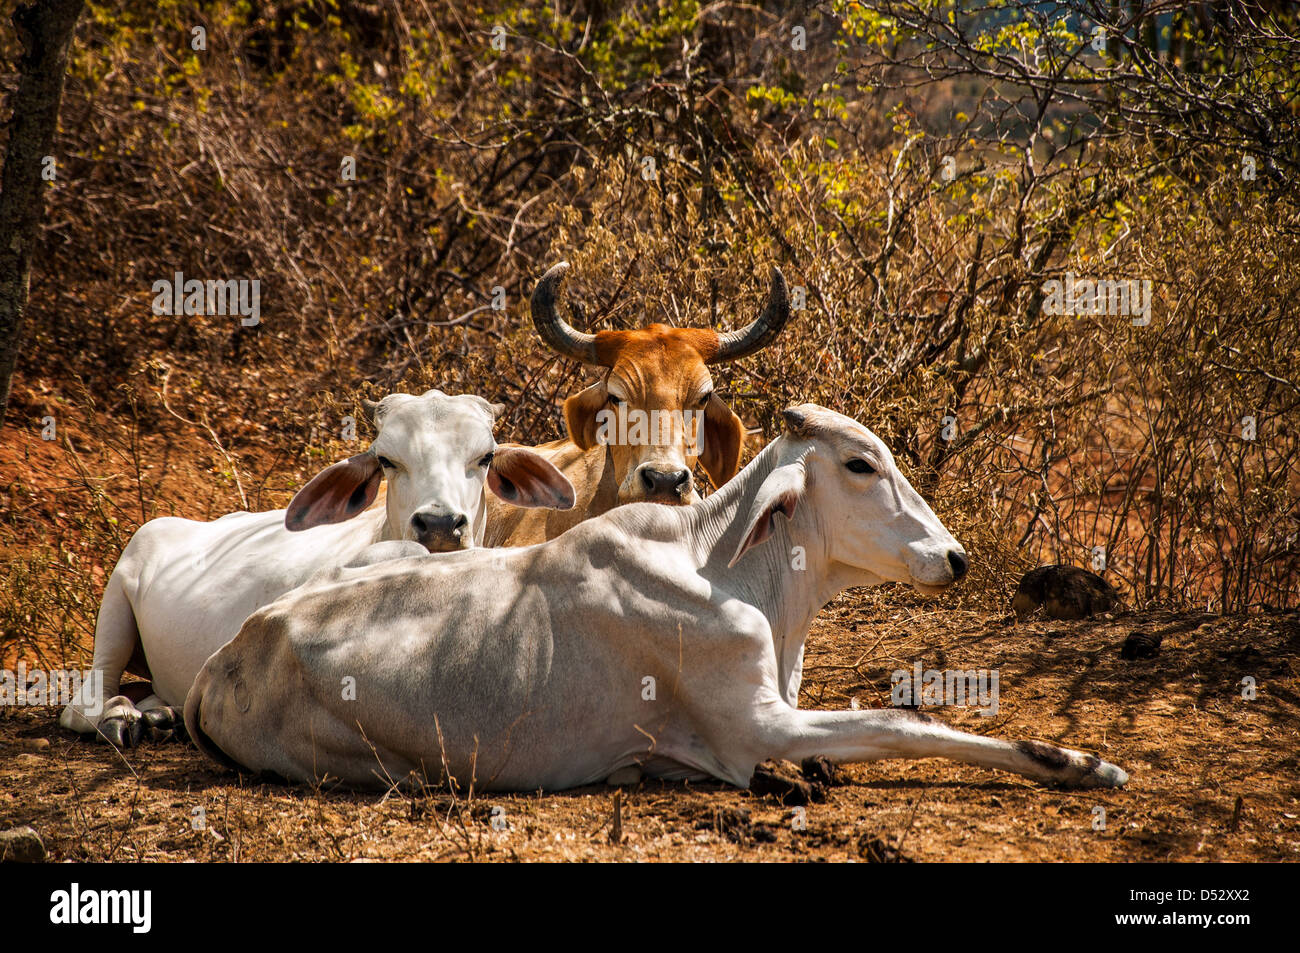 Three cows relaxing in the hot desert sun Stock Photo